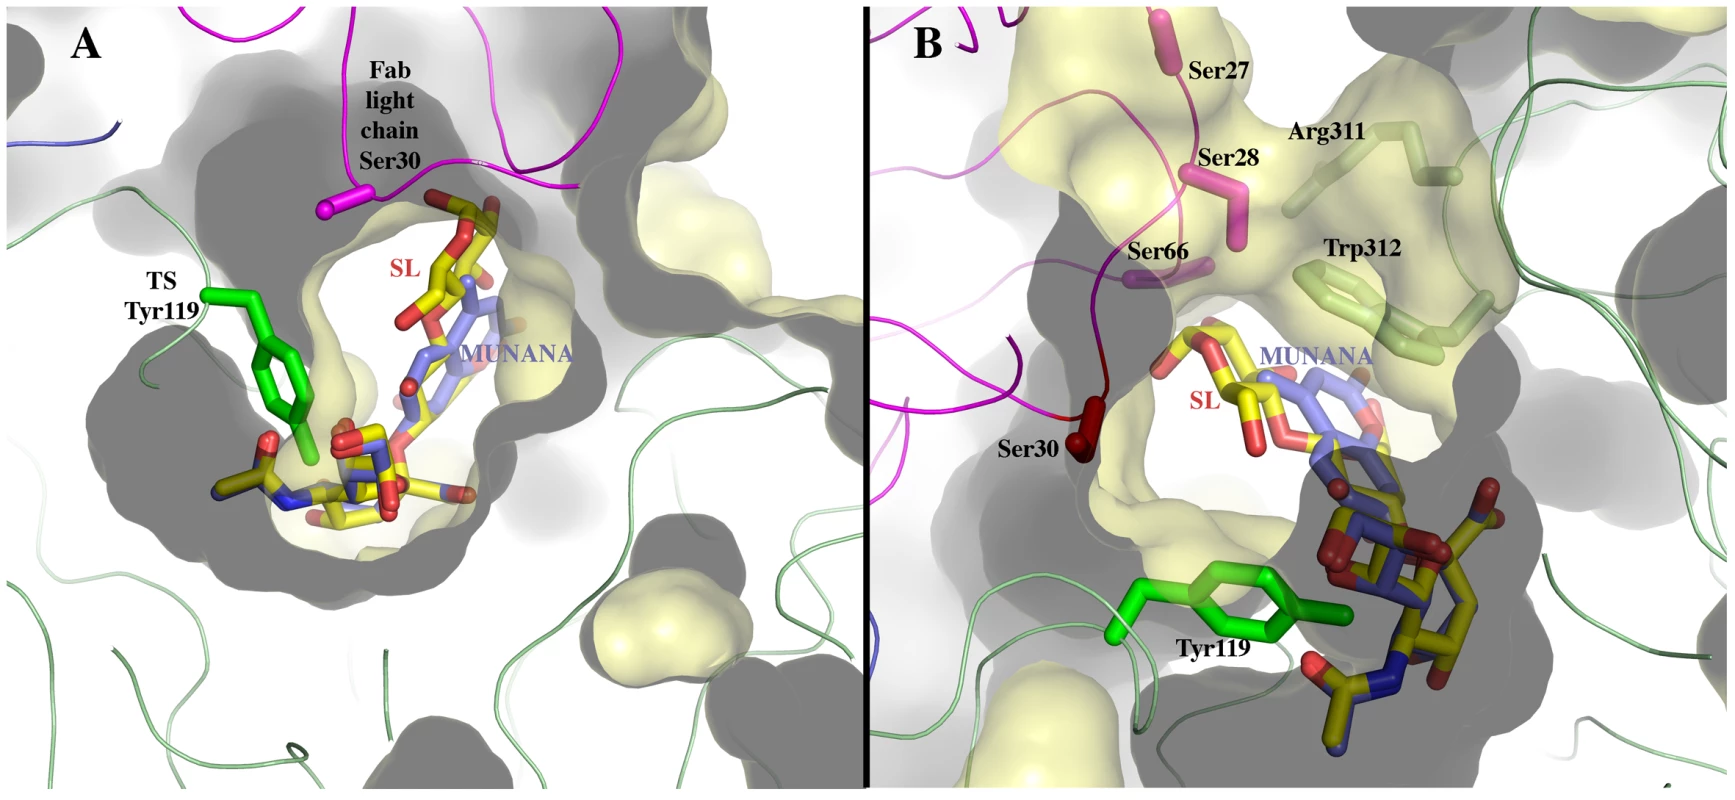 Sialoconjugate substrates modeled in the TS reaction center, in the context of the immunocomplex structure.